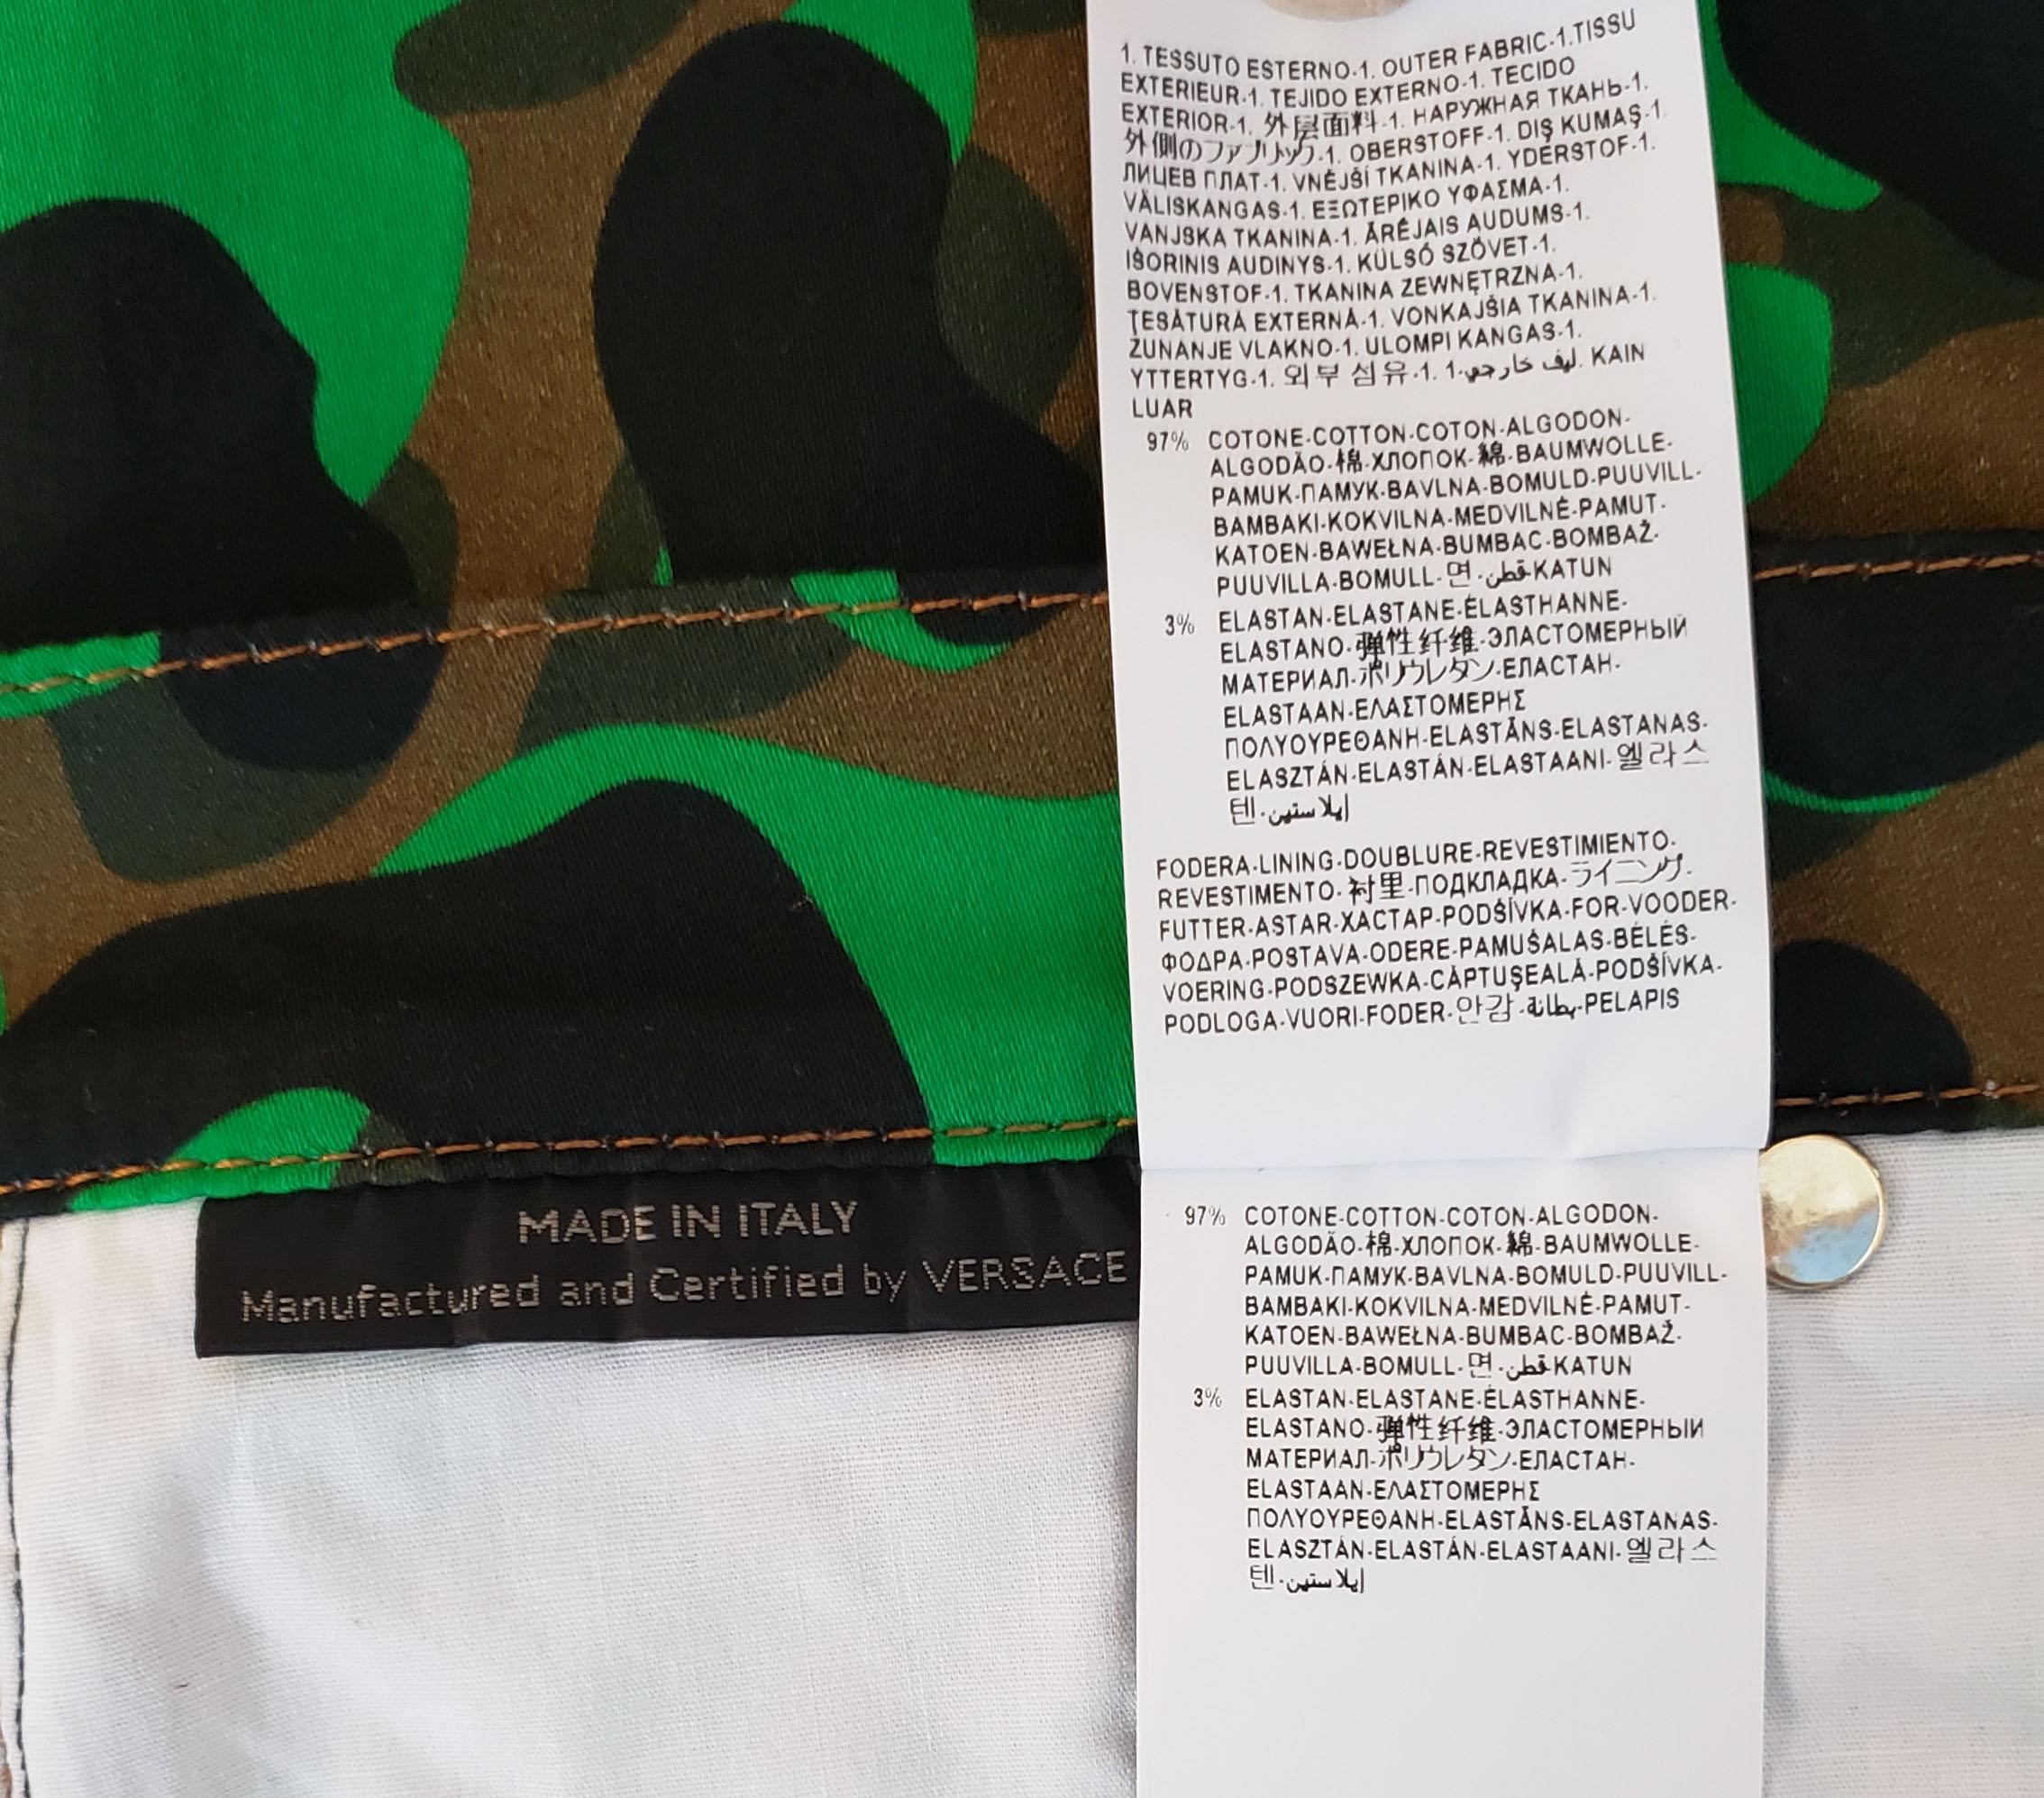 S/S 2016 VERSACE GREEN MILITARY PANTS size 28 For Sale 6